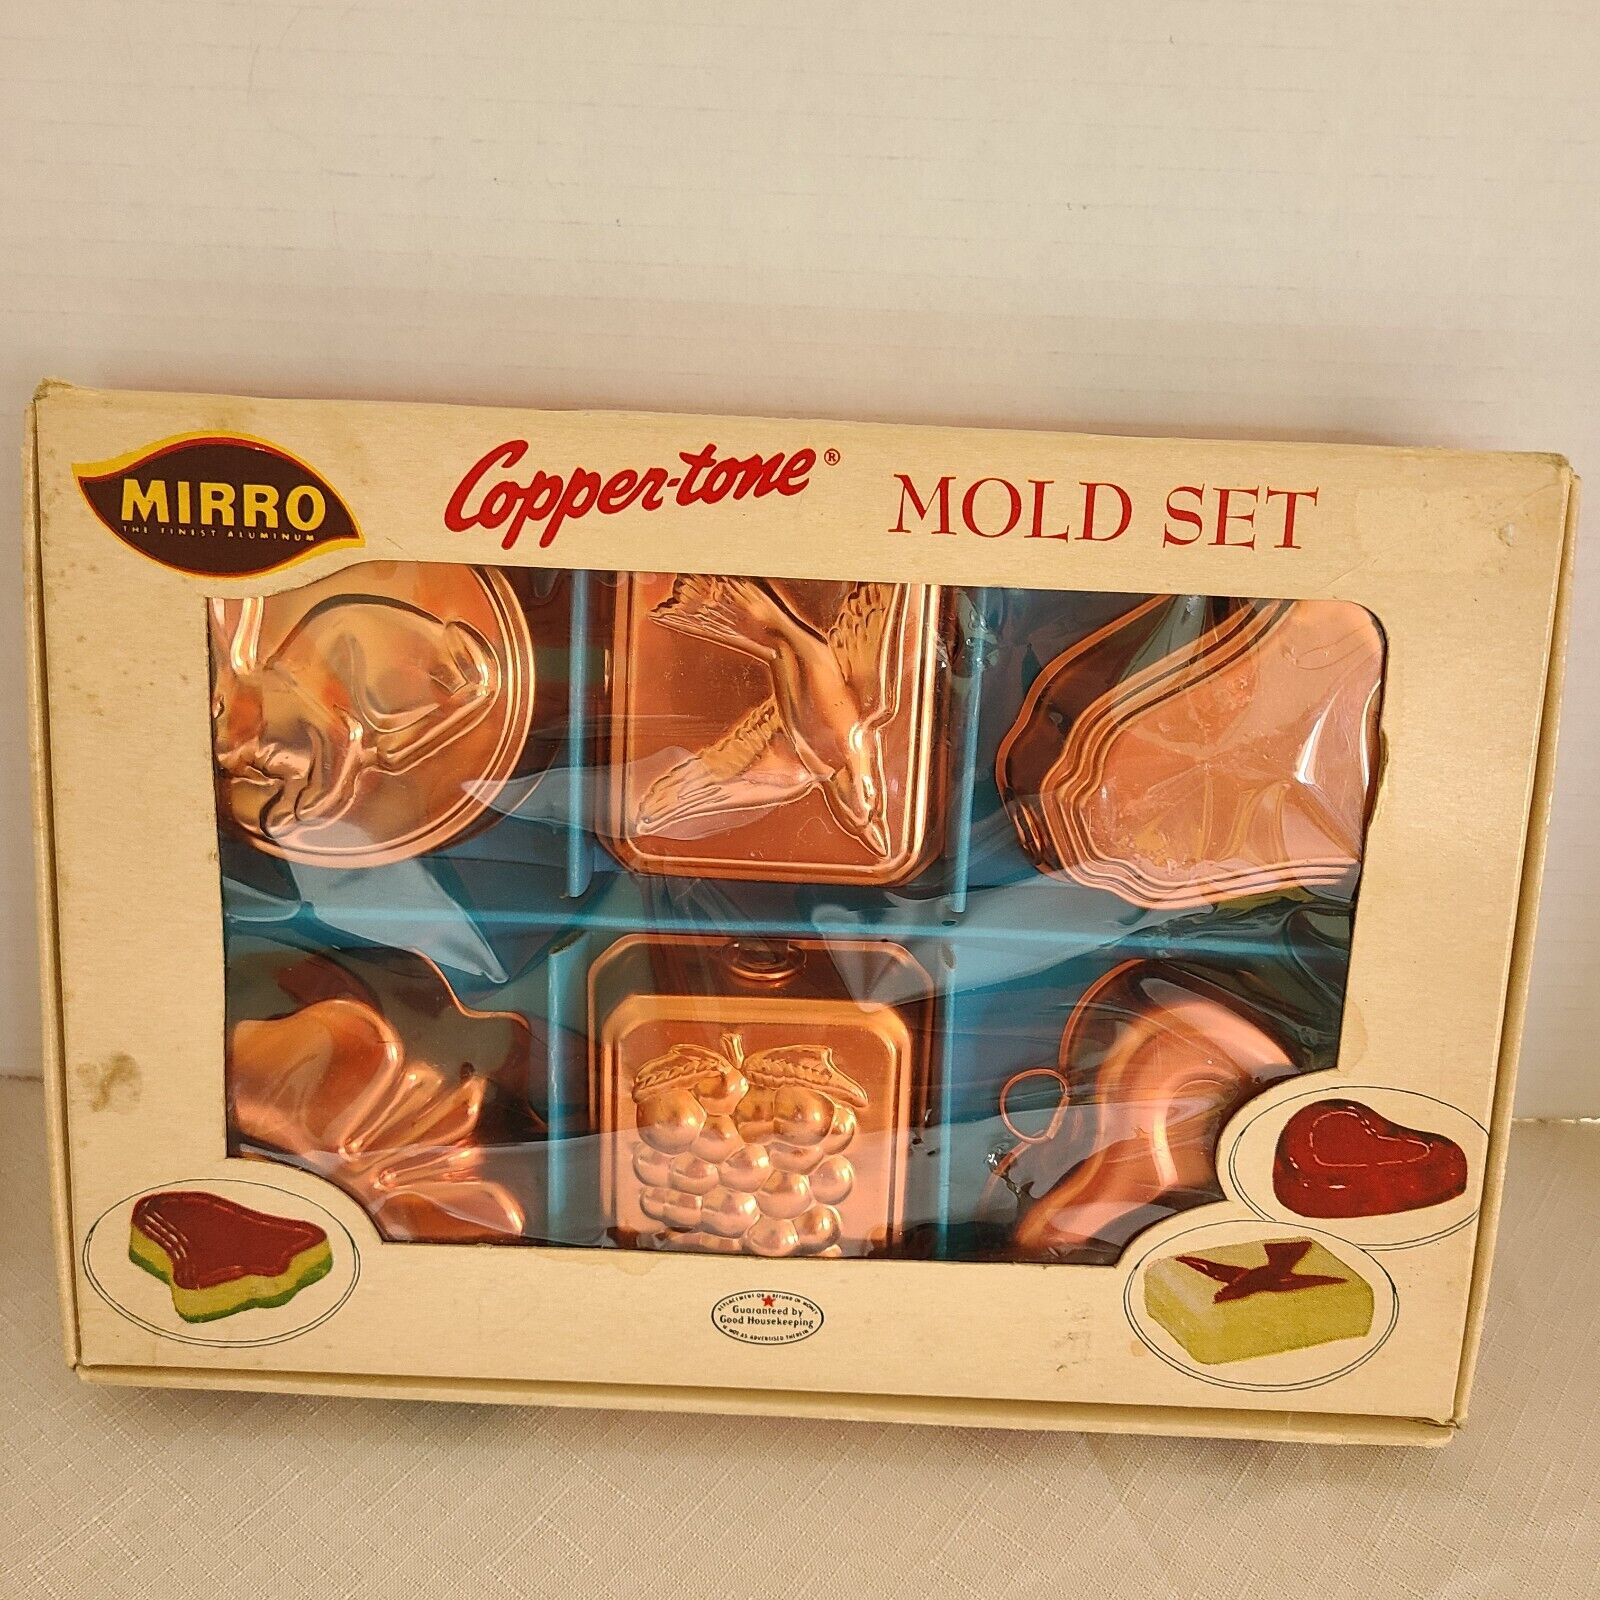 Vintage Mirro Copper Tone Mold Set in Original Display Box Wall Plaques Made USA